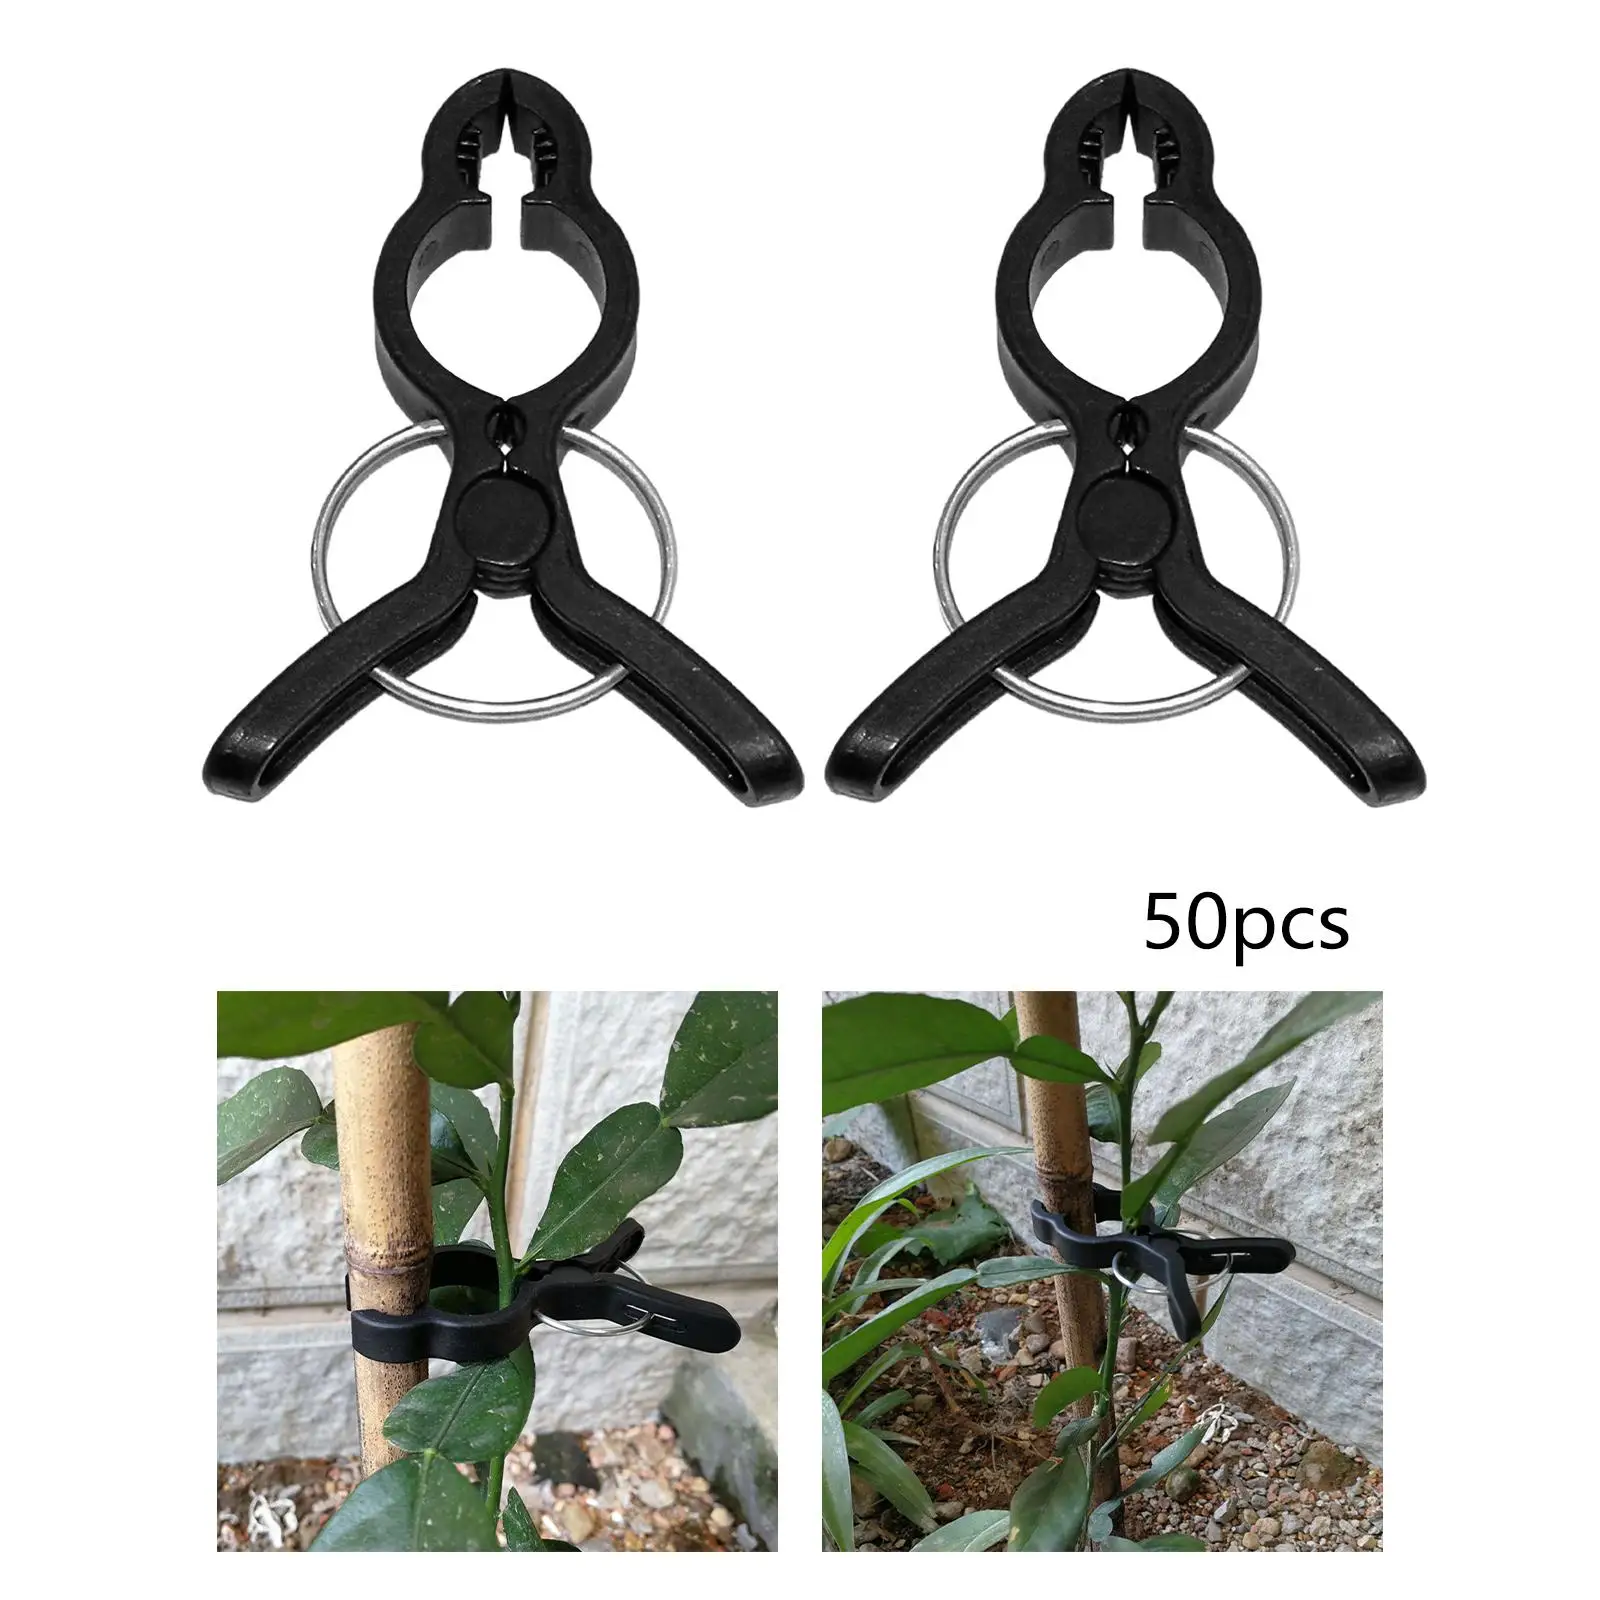 50 Pieces Plant Clip Vines Supporter Frame for Gardening Tool Flower Vines Straightening Tomato Cage Vines Grow Upright Climbing